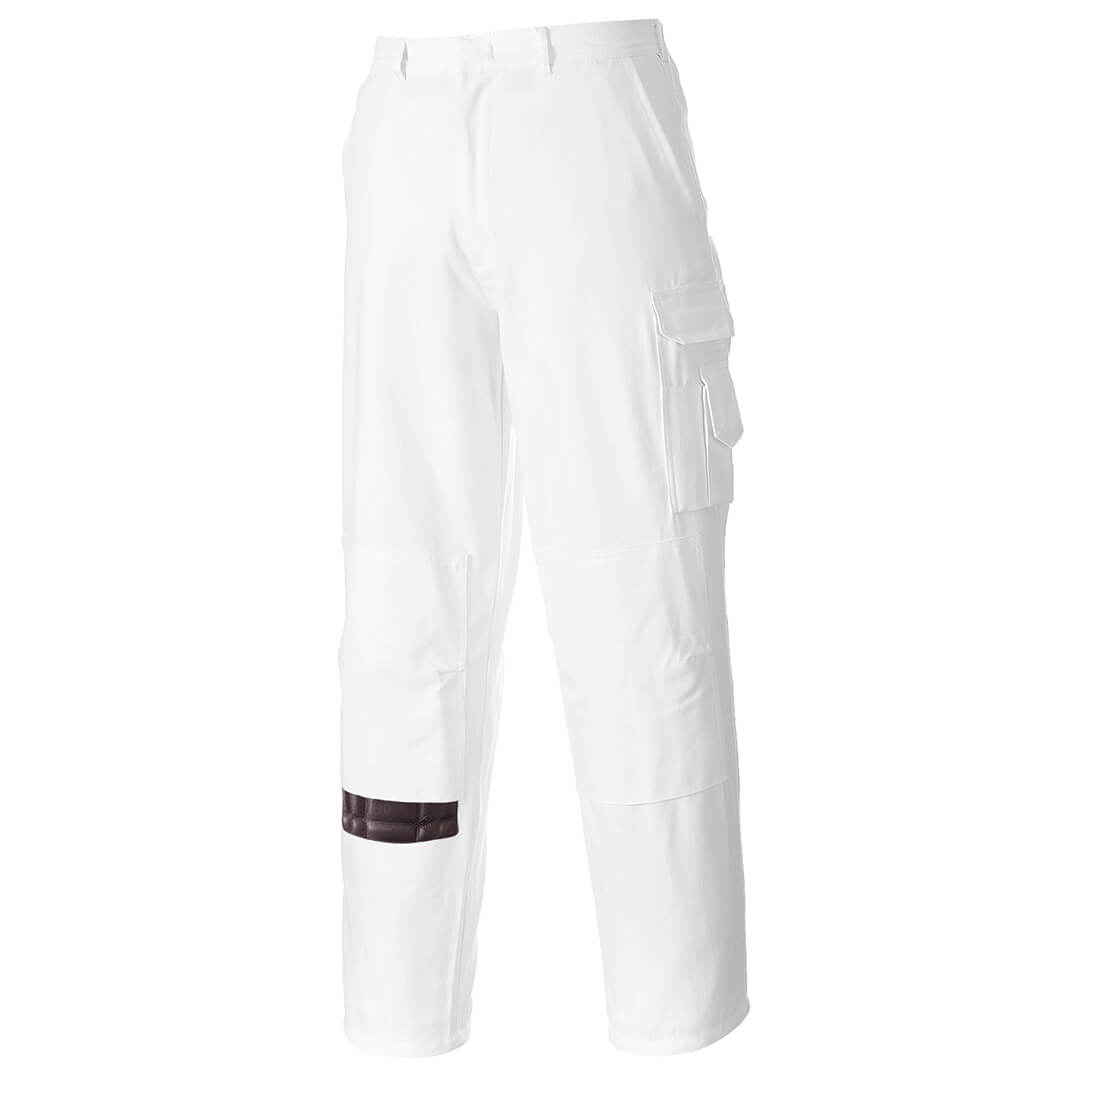 Image of Portwest Painters Trousers White 2XL 33"